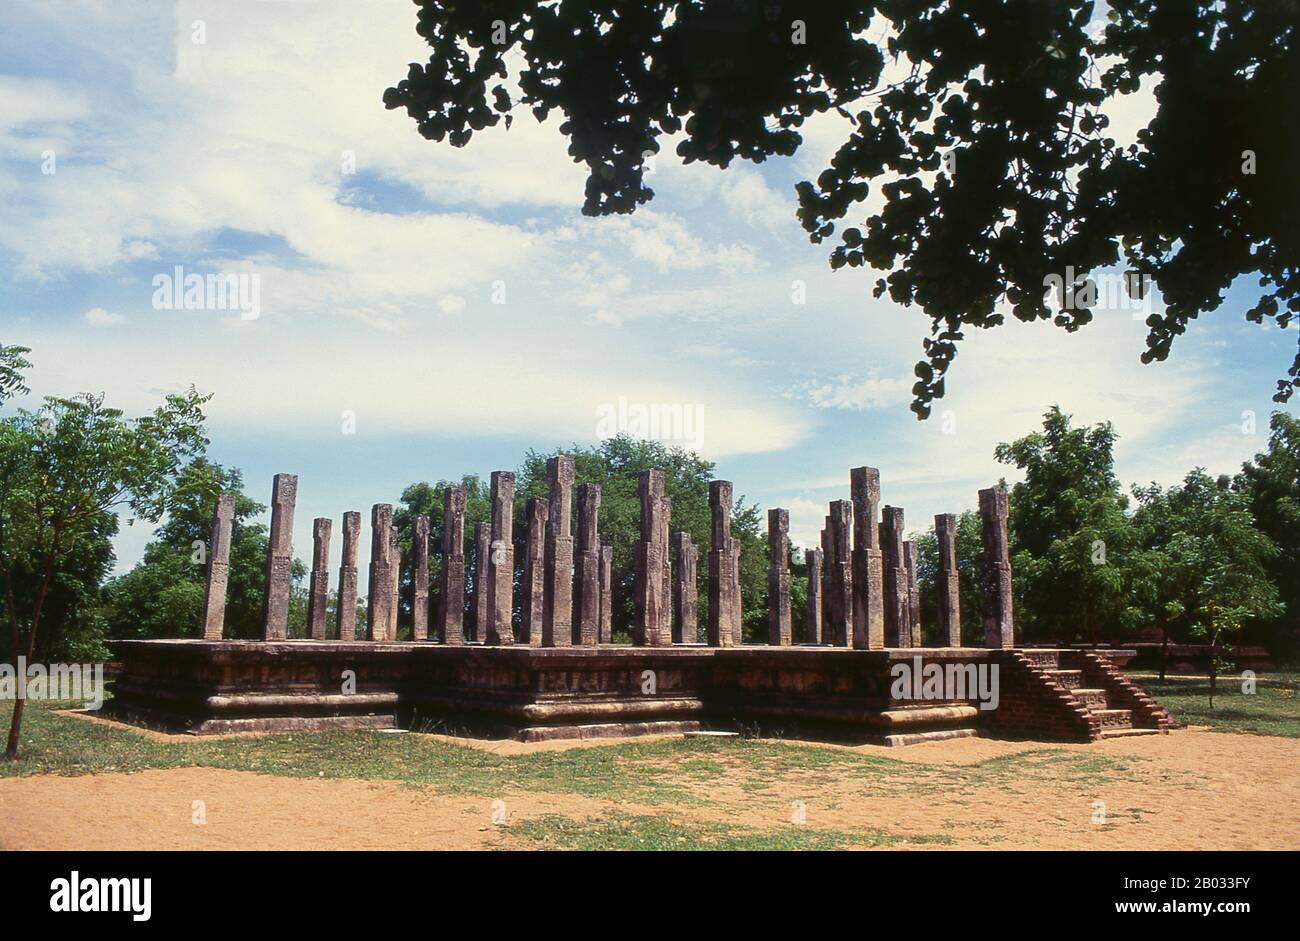 Polonnaruwa, the second most ancient of Sri Lanka's kingdoms, was first declared the capital city by King Vijayabahu I, who defeated the Chola invaders in 1070 CE to reunite the country under a national leader. Stock Photo